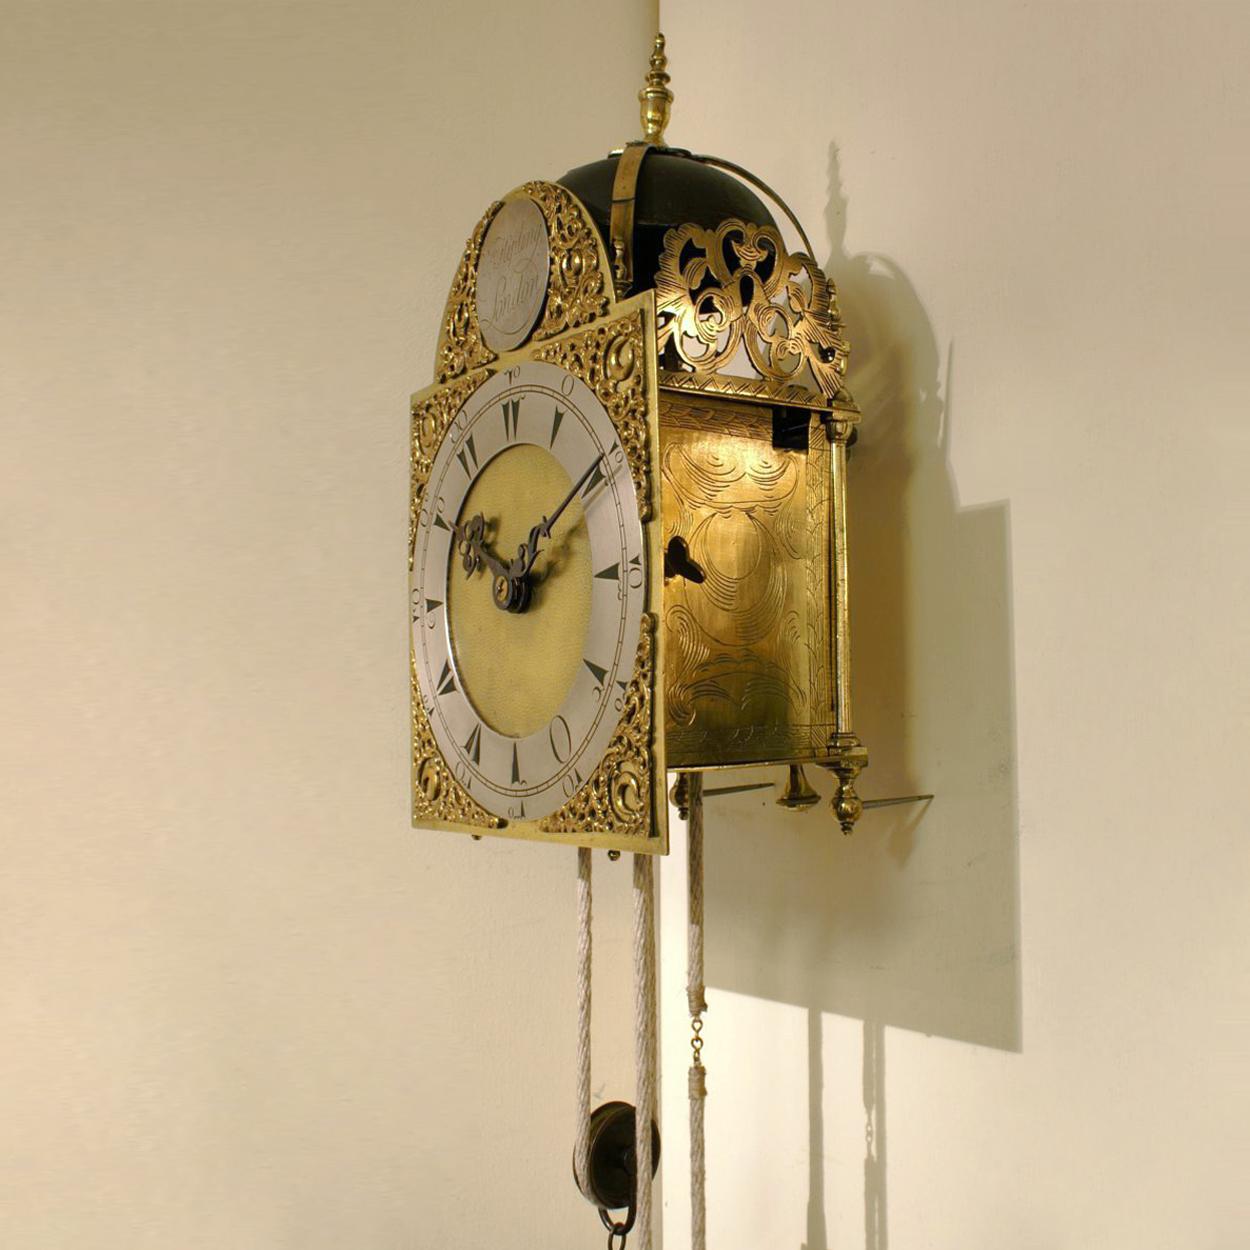 A fine 18th century English brass and iron lantern clock. Signature: William Kipling, London The clock consists of going and striking trains, as well as an alarm and is driven by lead weights. The front fret is richly decorated. The corners and the